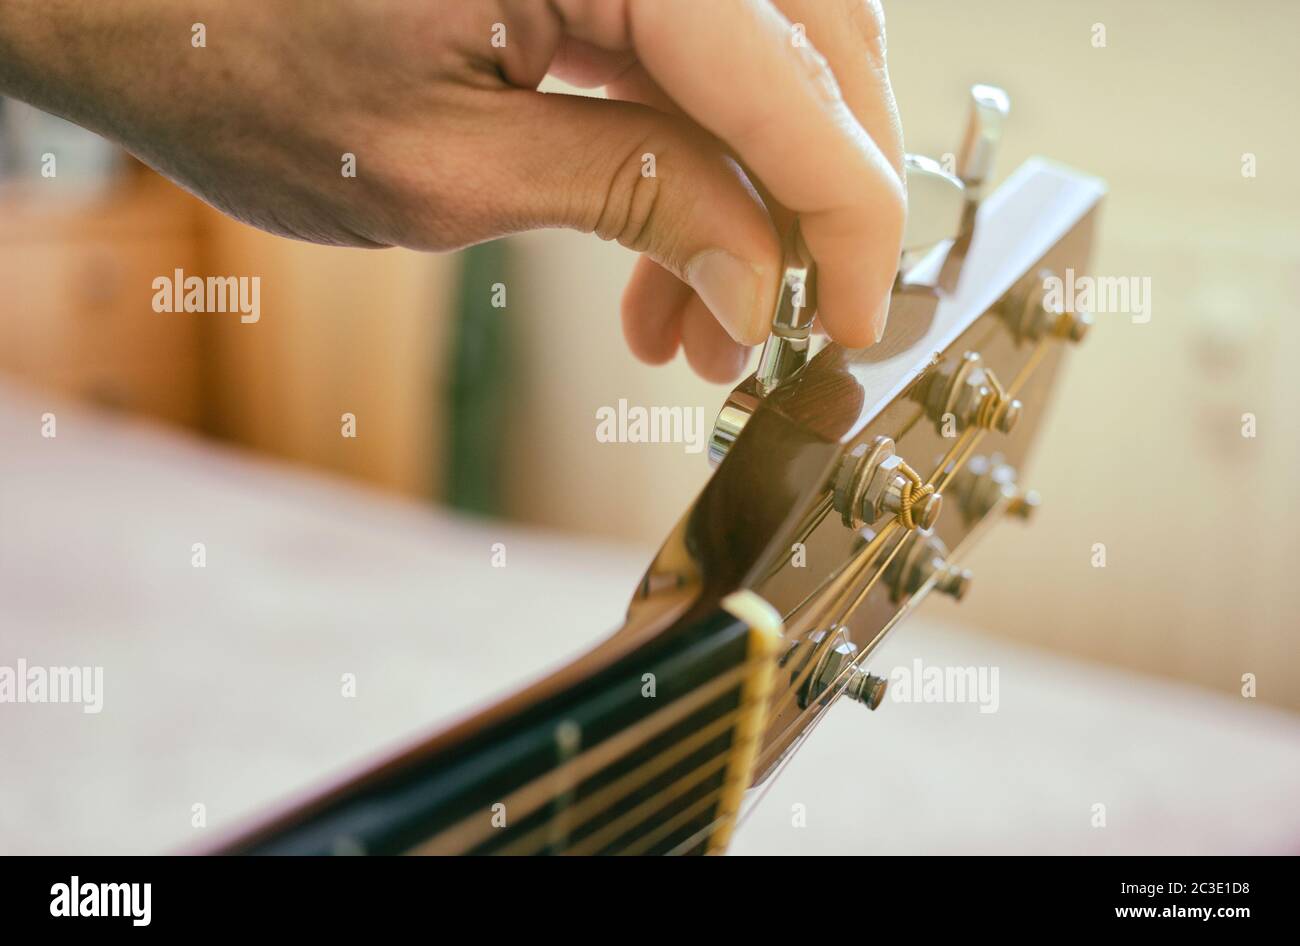 Tuning the guitar. Fingers are turning the tuning peg on the head of acoustic guitar. Authentic shot with blurred room in the background. Stock Photo